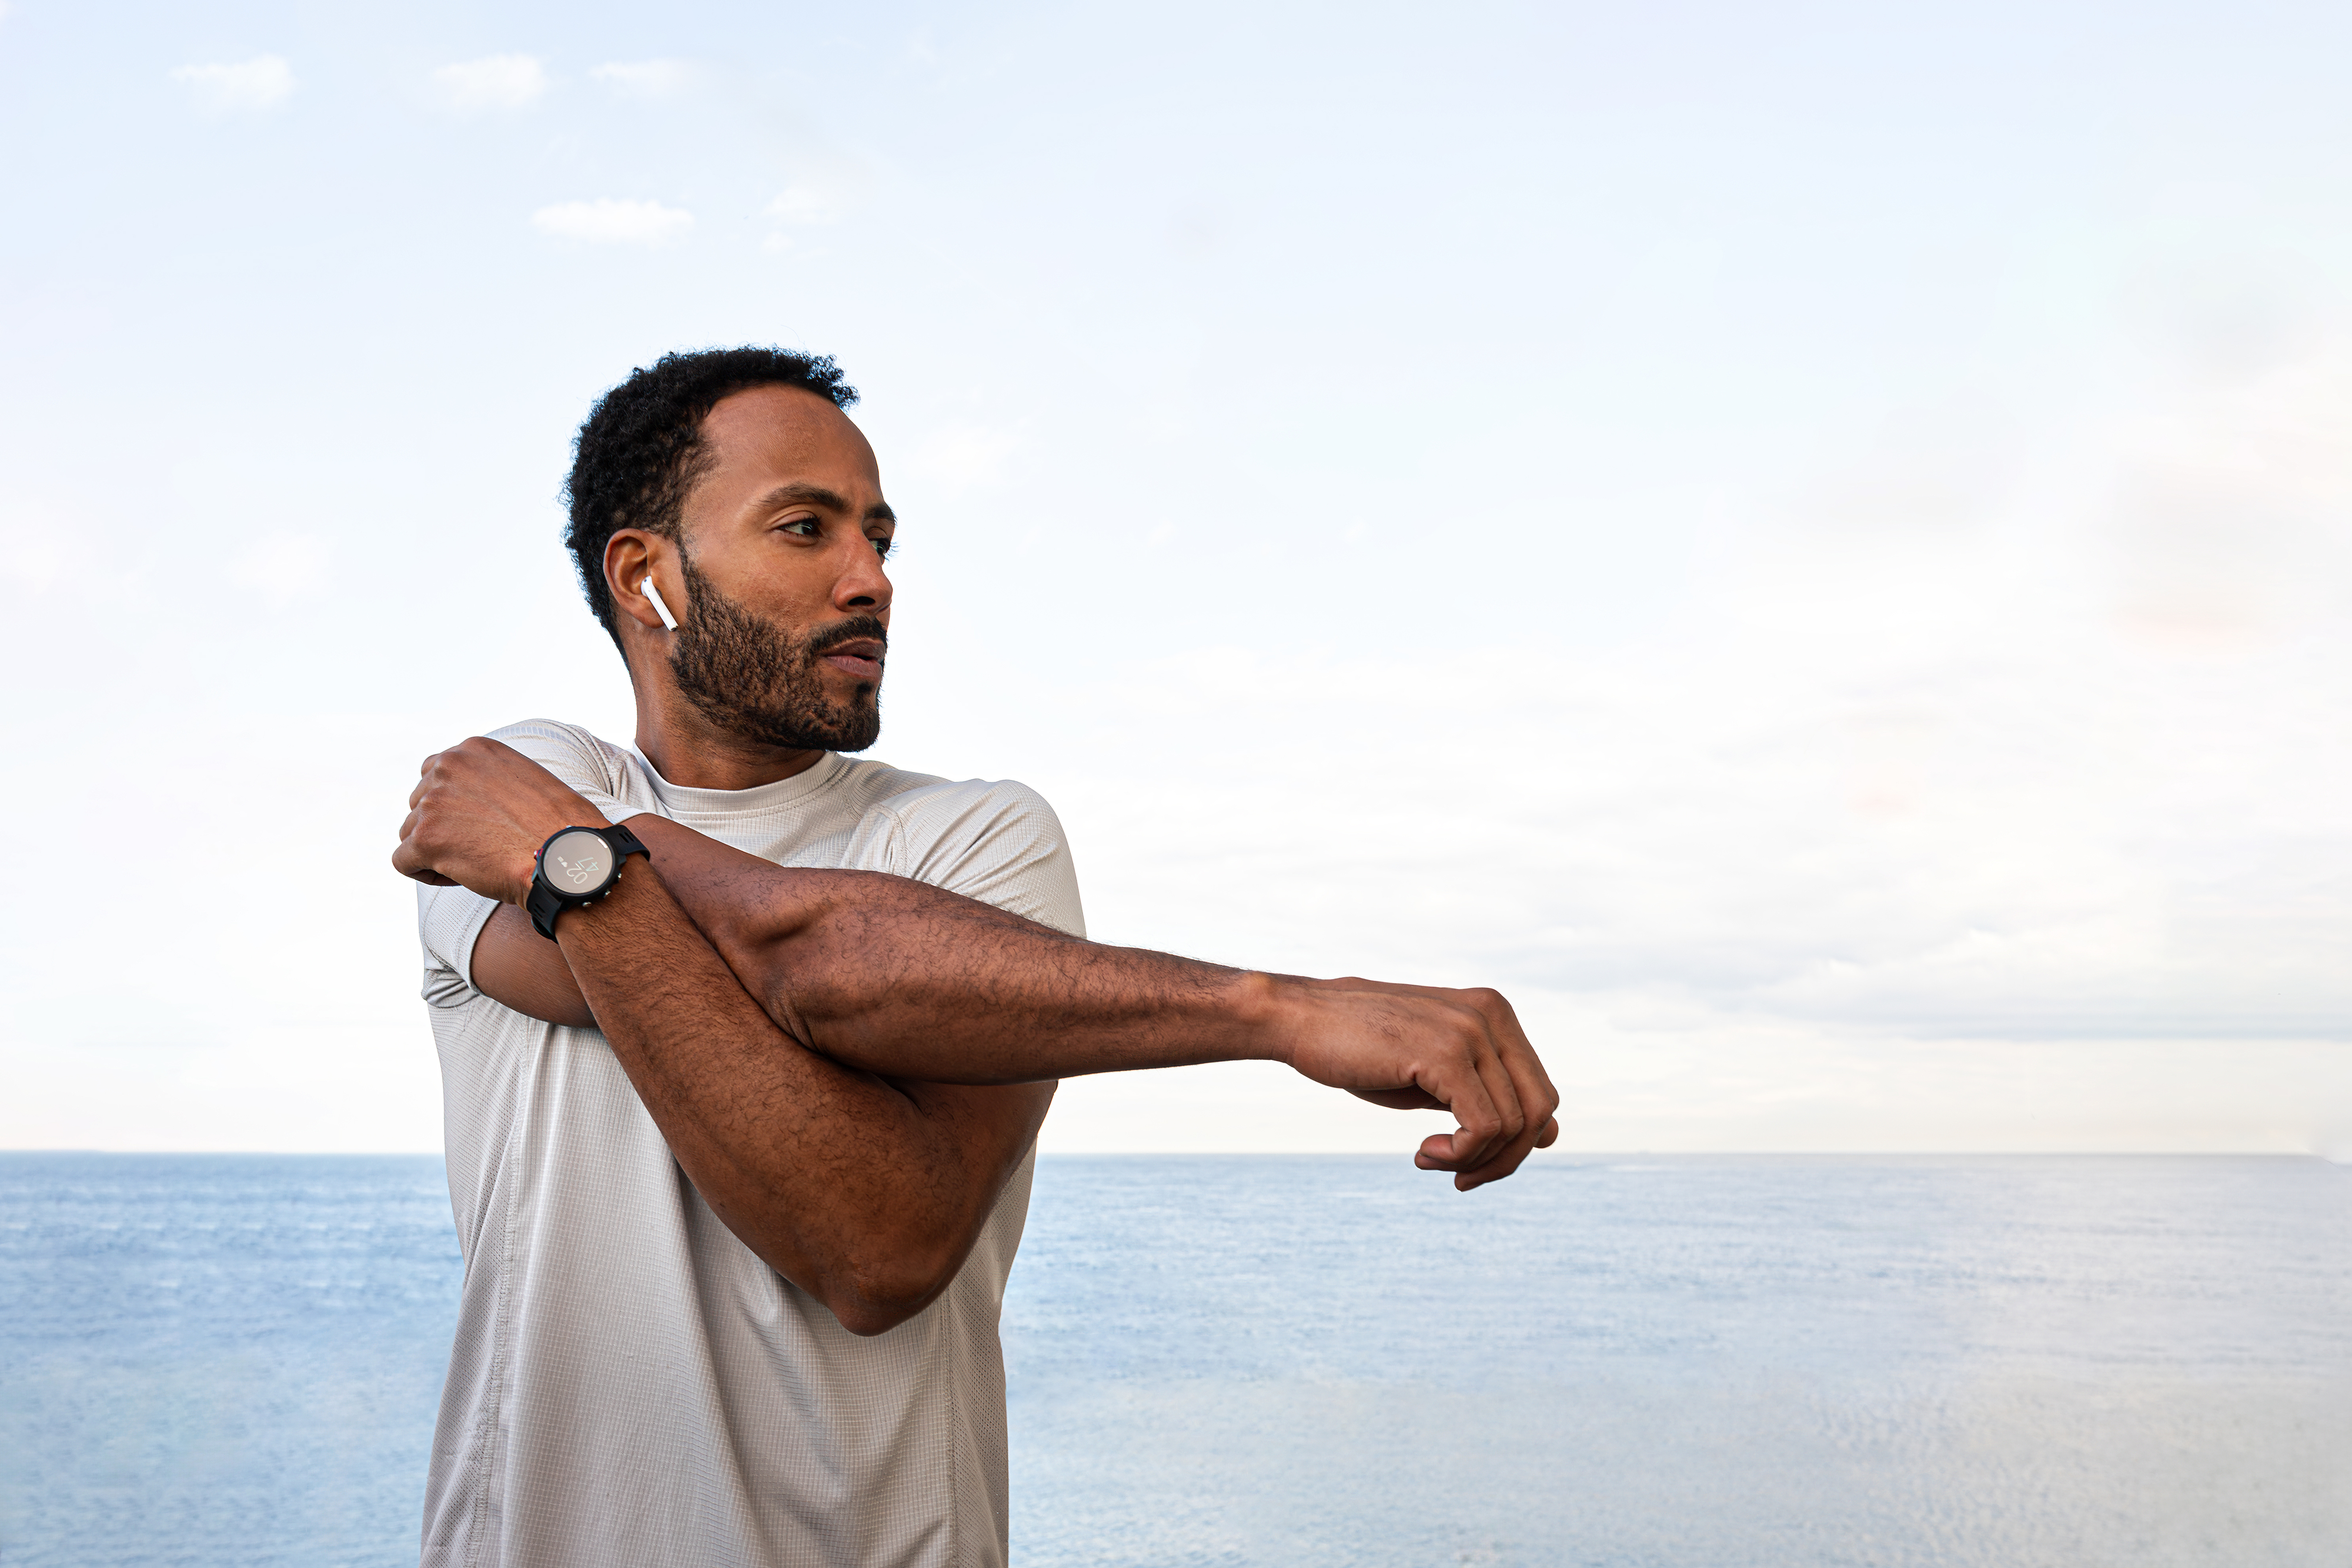 Person stretching their arm across their chest, facing body of water. Wearing casual attire with a watch